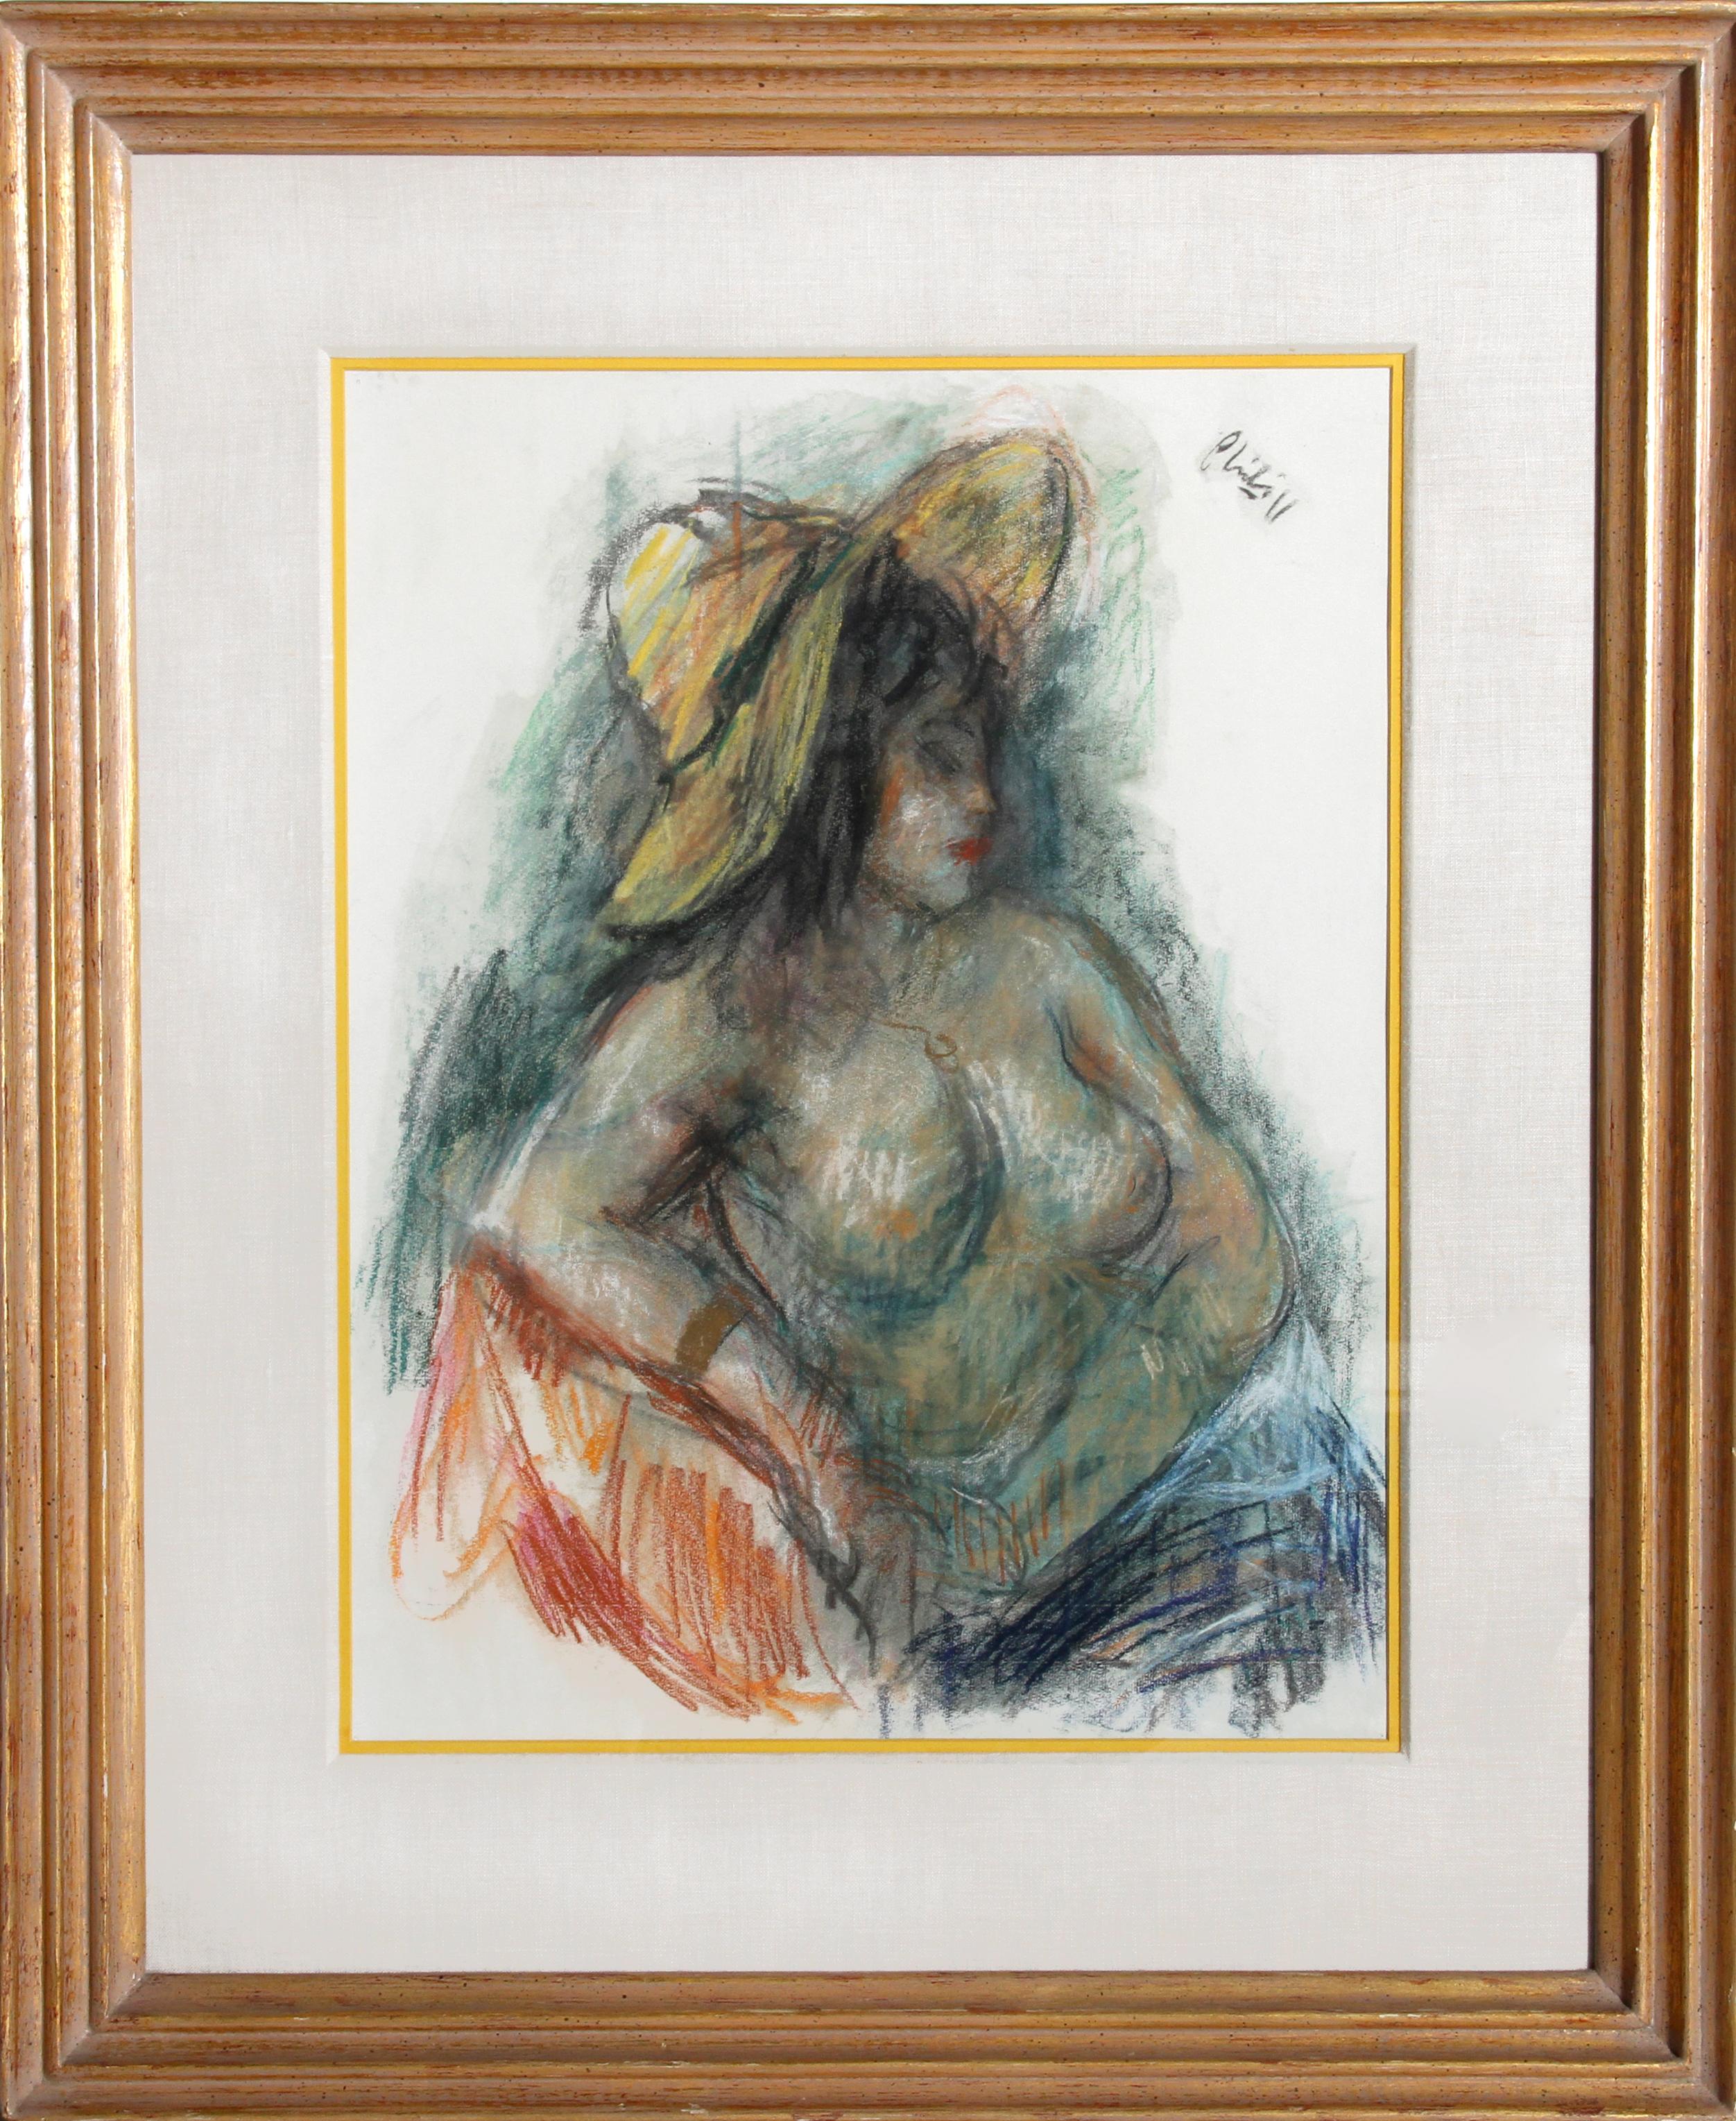 Seated Nude Woman in Yellow Hat, Pastel Drawing by Robert Philipp